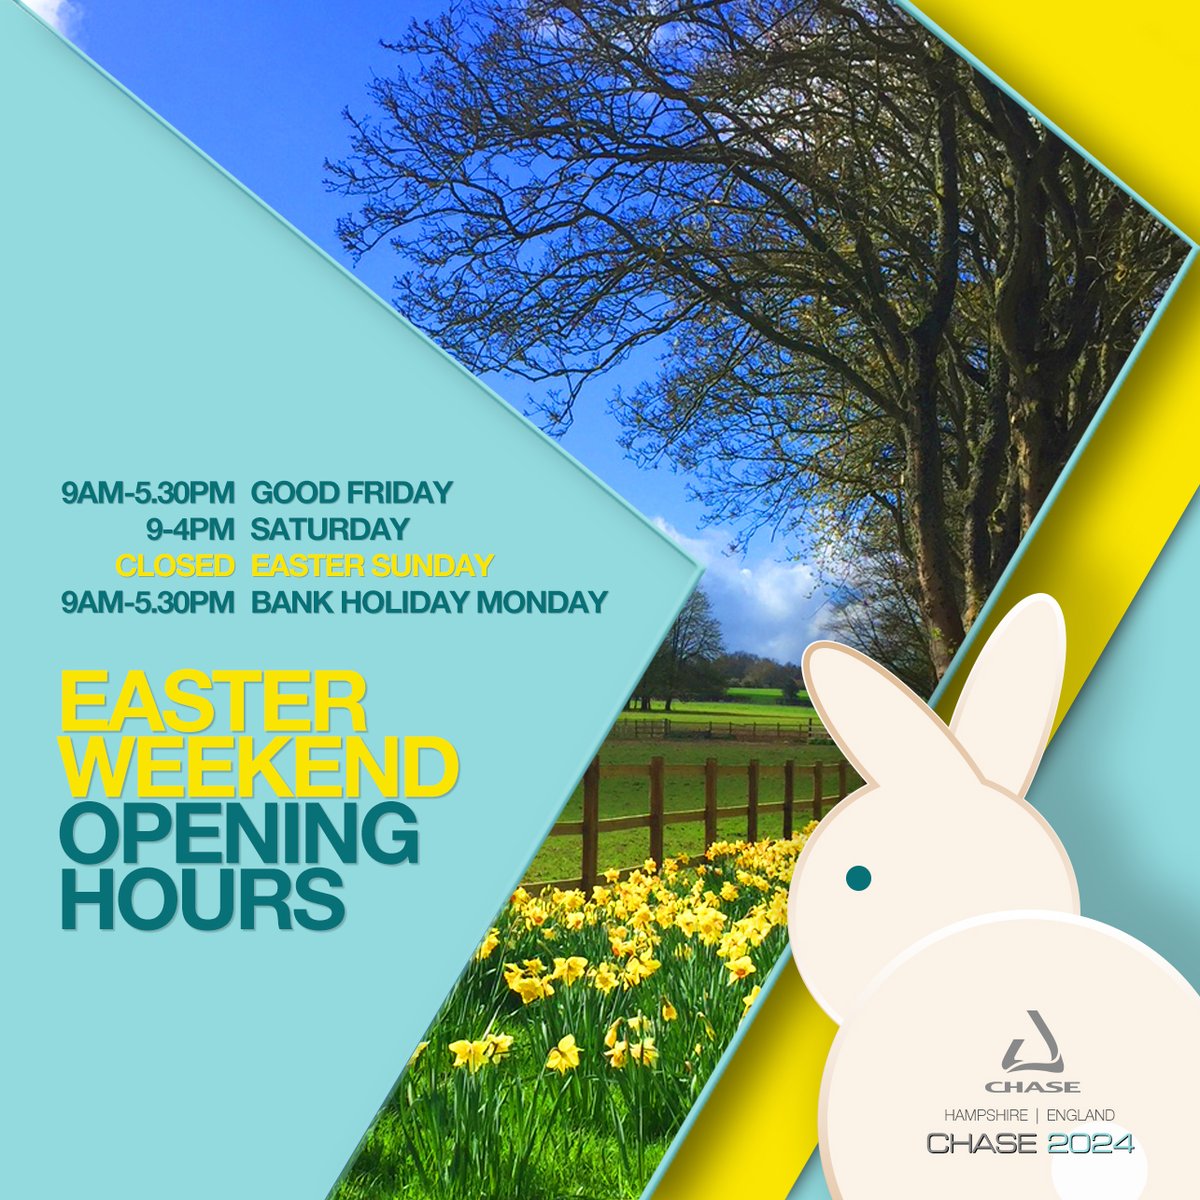 Easter Weekend Opening Hours 🌱 We will be open as usual Good Friday & Bank Holiday Monday, with extended opening hours on Saturday! Why not head down & we'll be ready to set you up with some brand new kit 🏏 #chasecricketbats #chasecricket #cricketbats #cricketkit #cricketshop